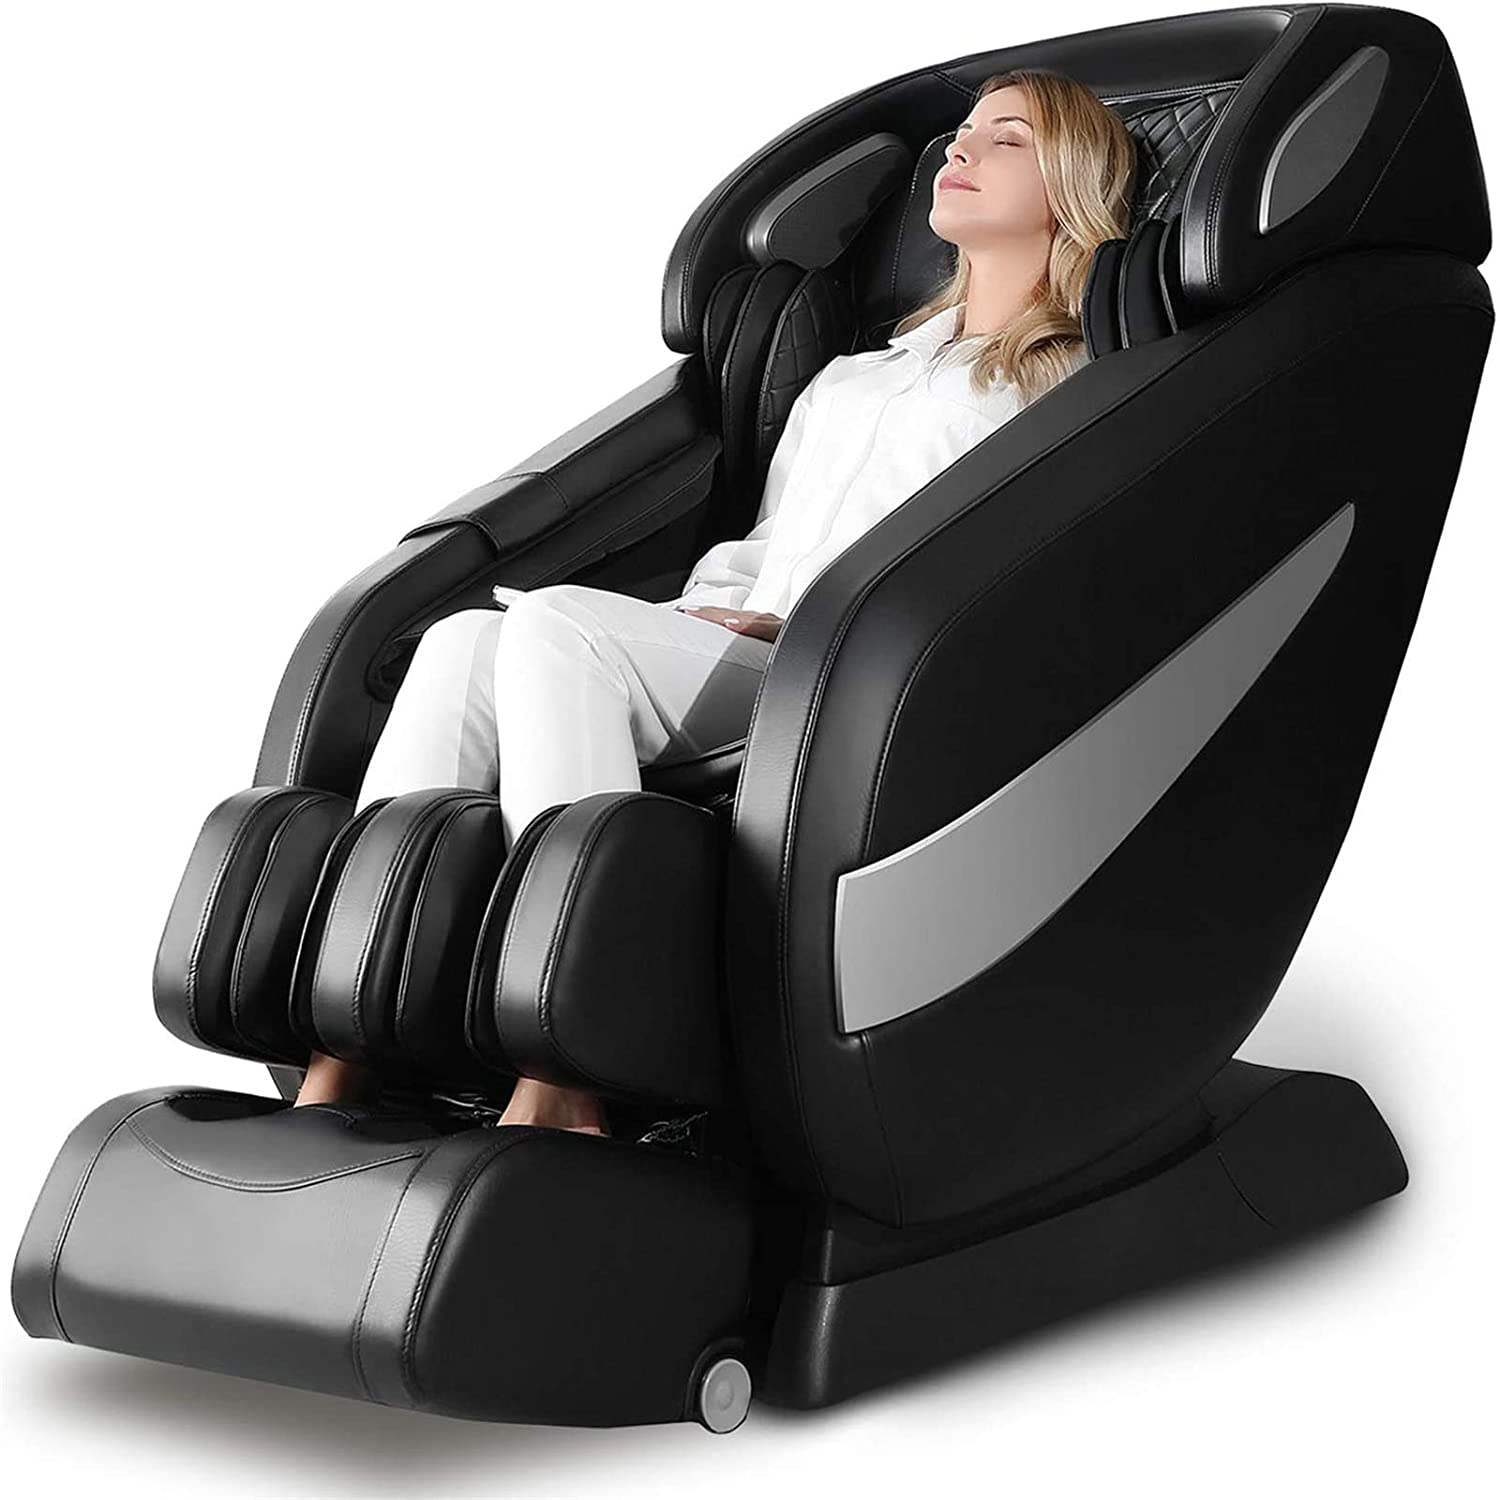 Top 10 Best Cheap Massage Chairs in 2022 - Top Best Pro Review